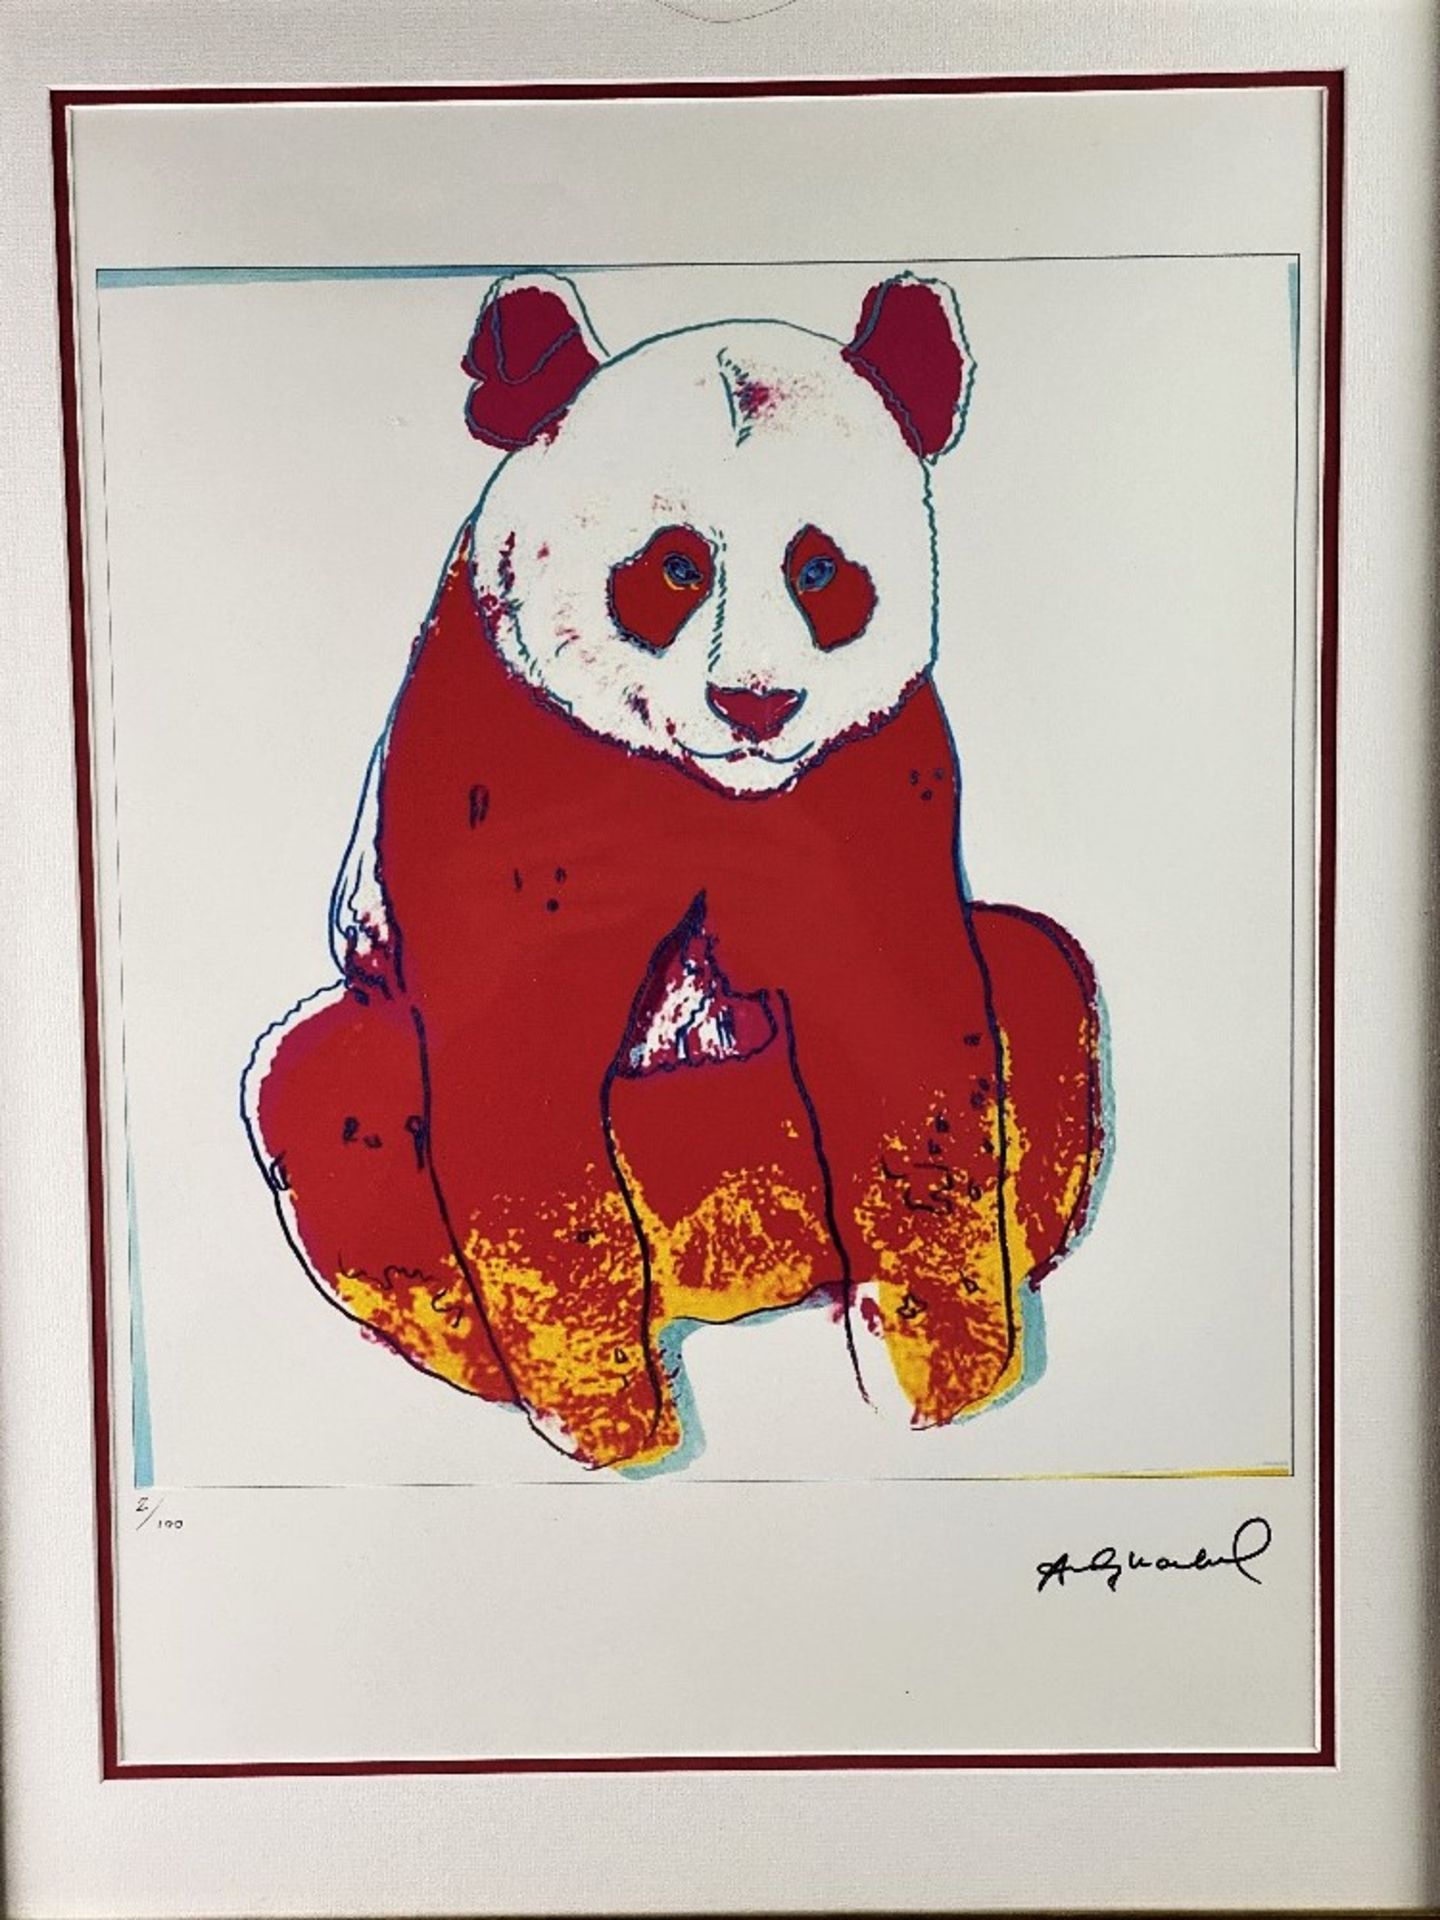 Andy Warhol-(1928-1987) "Panda" Numbered Lithograph#2/100 - Image 2 of 7